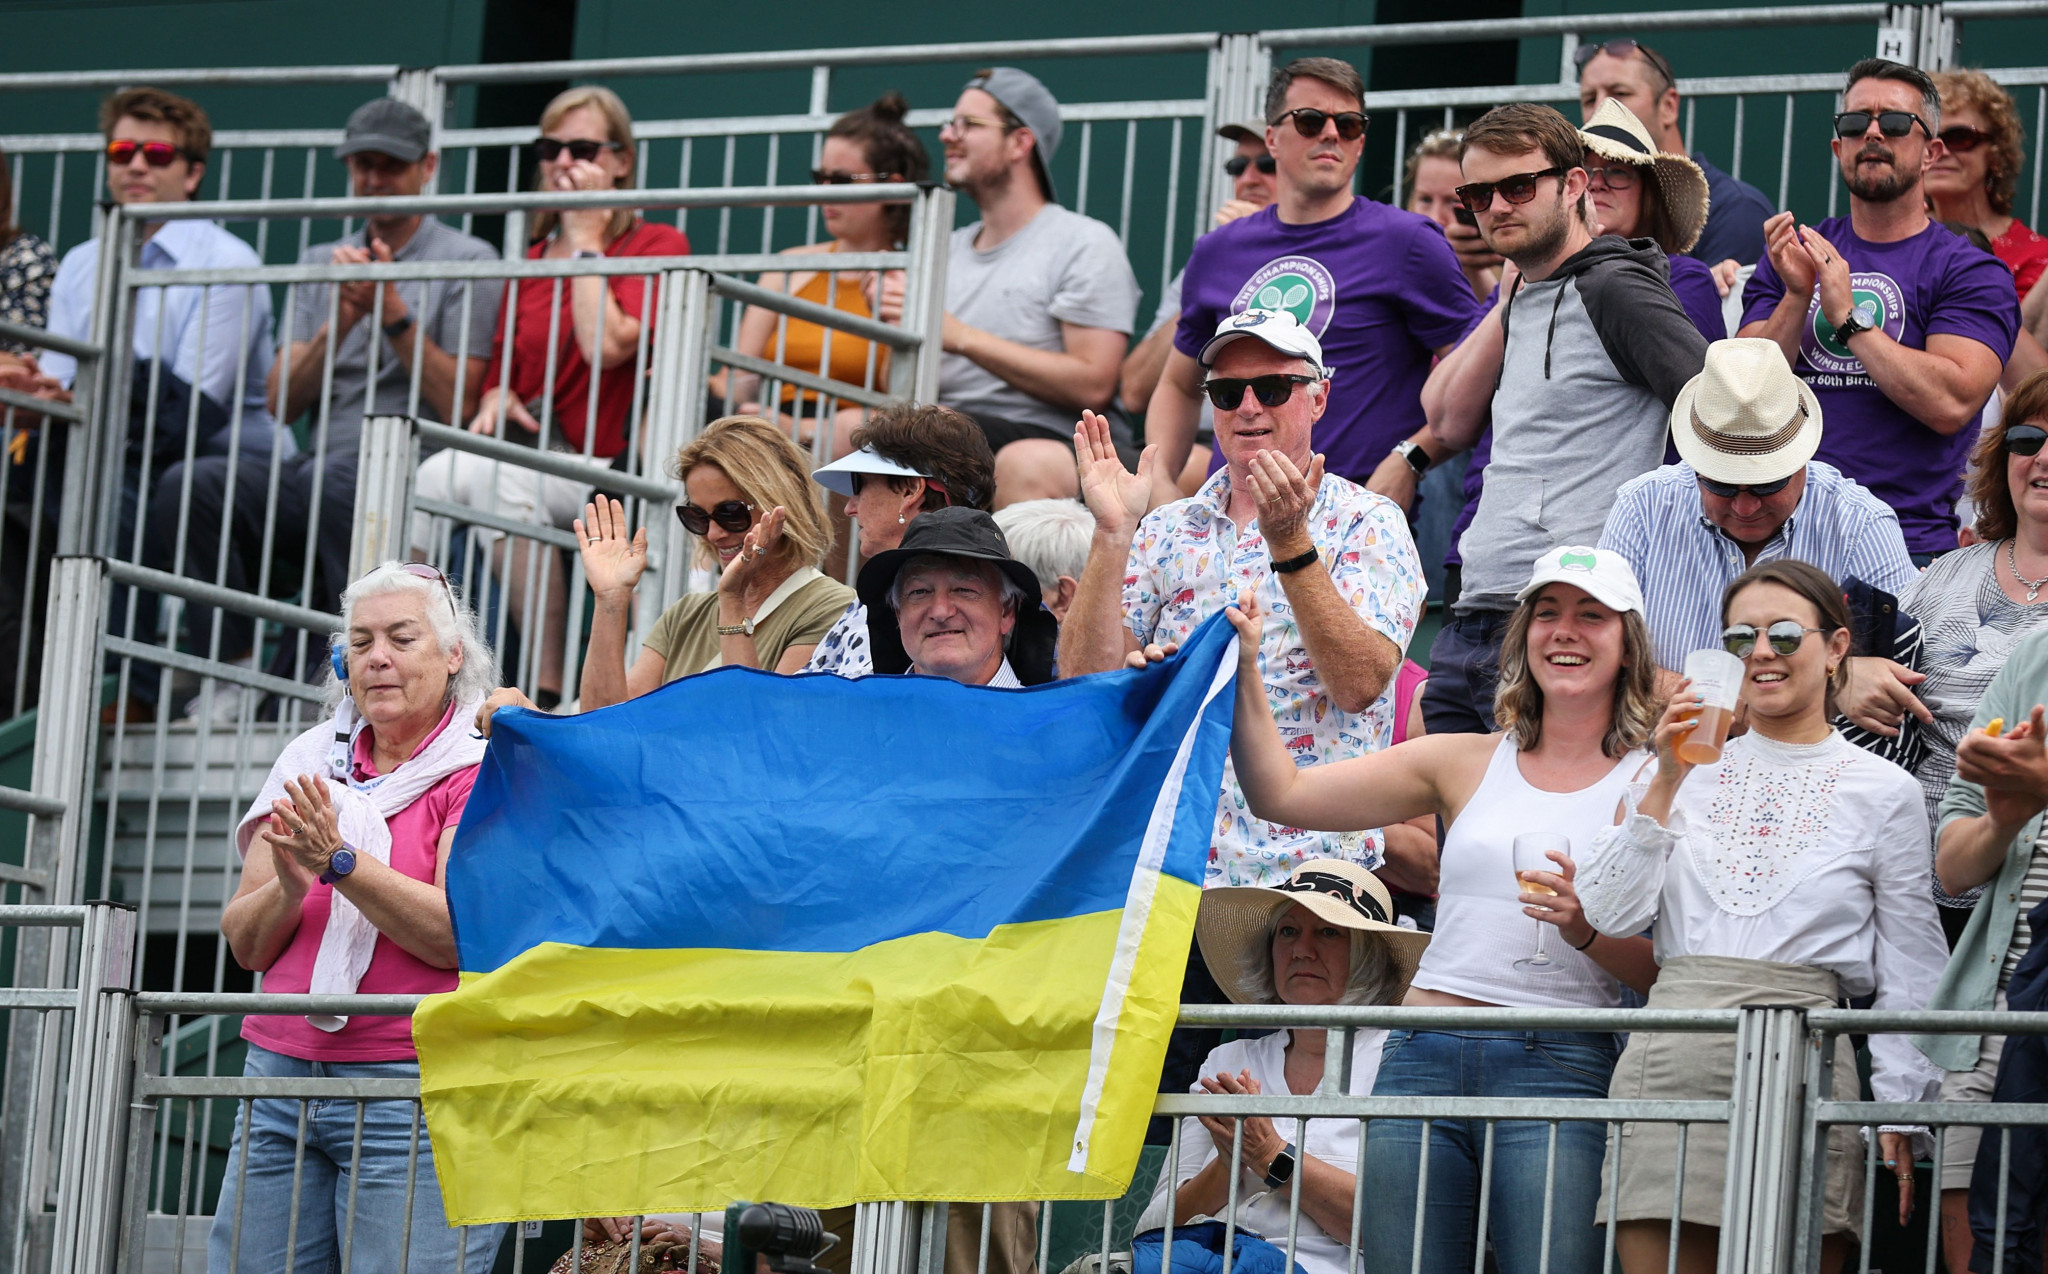 Wimbledon is make a donation from ticket sales to the Ukraine relief fund ©Getty Images